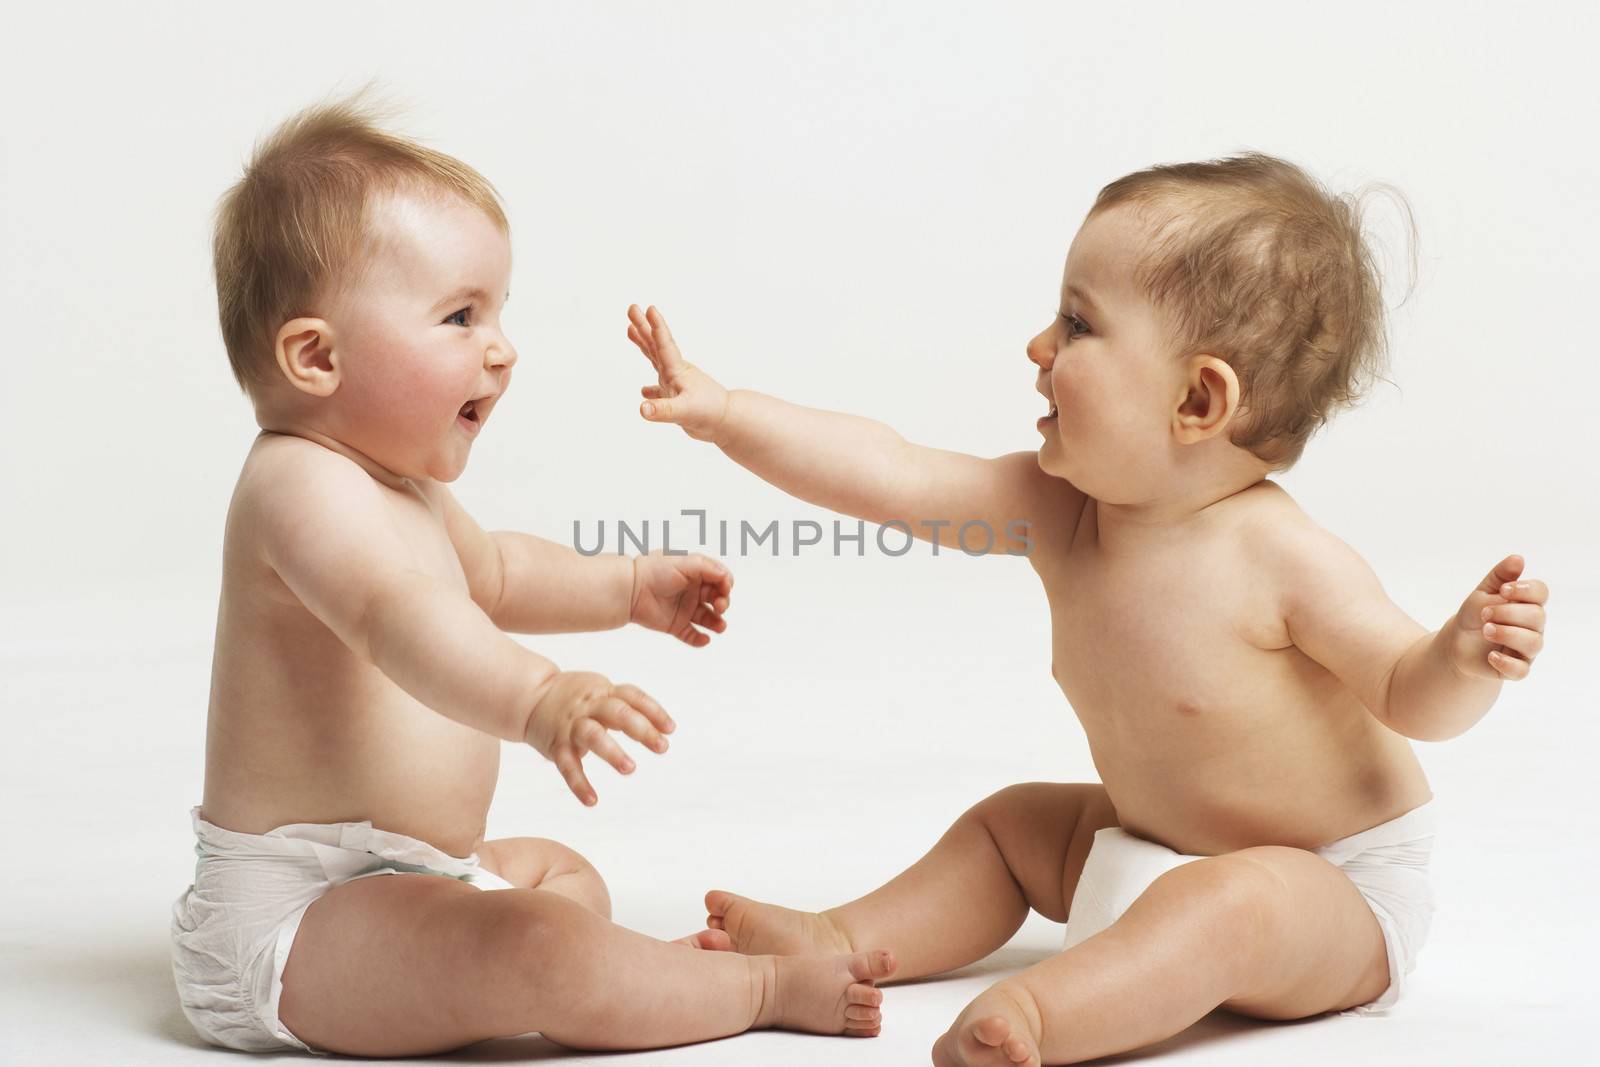 Side view of two babies playing on white background by moodboard